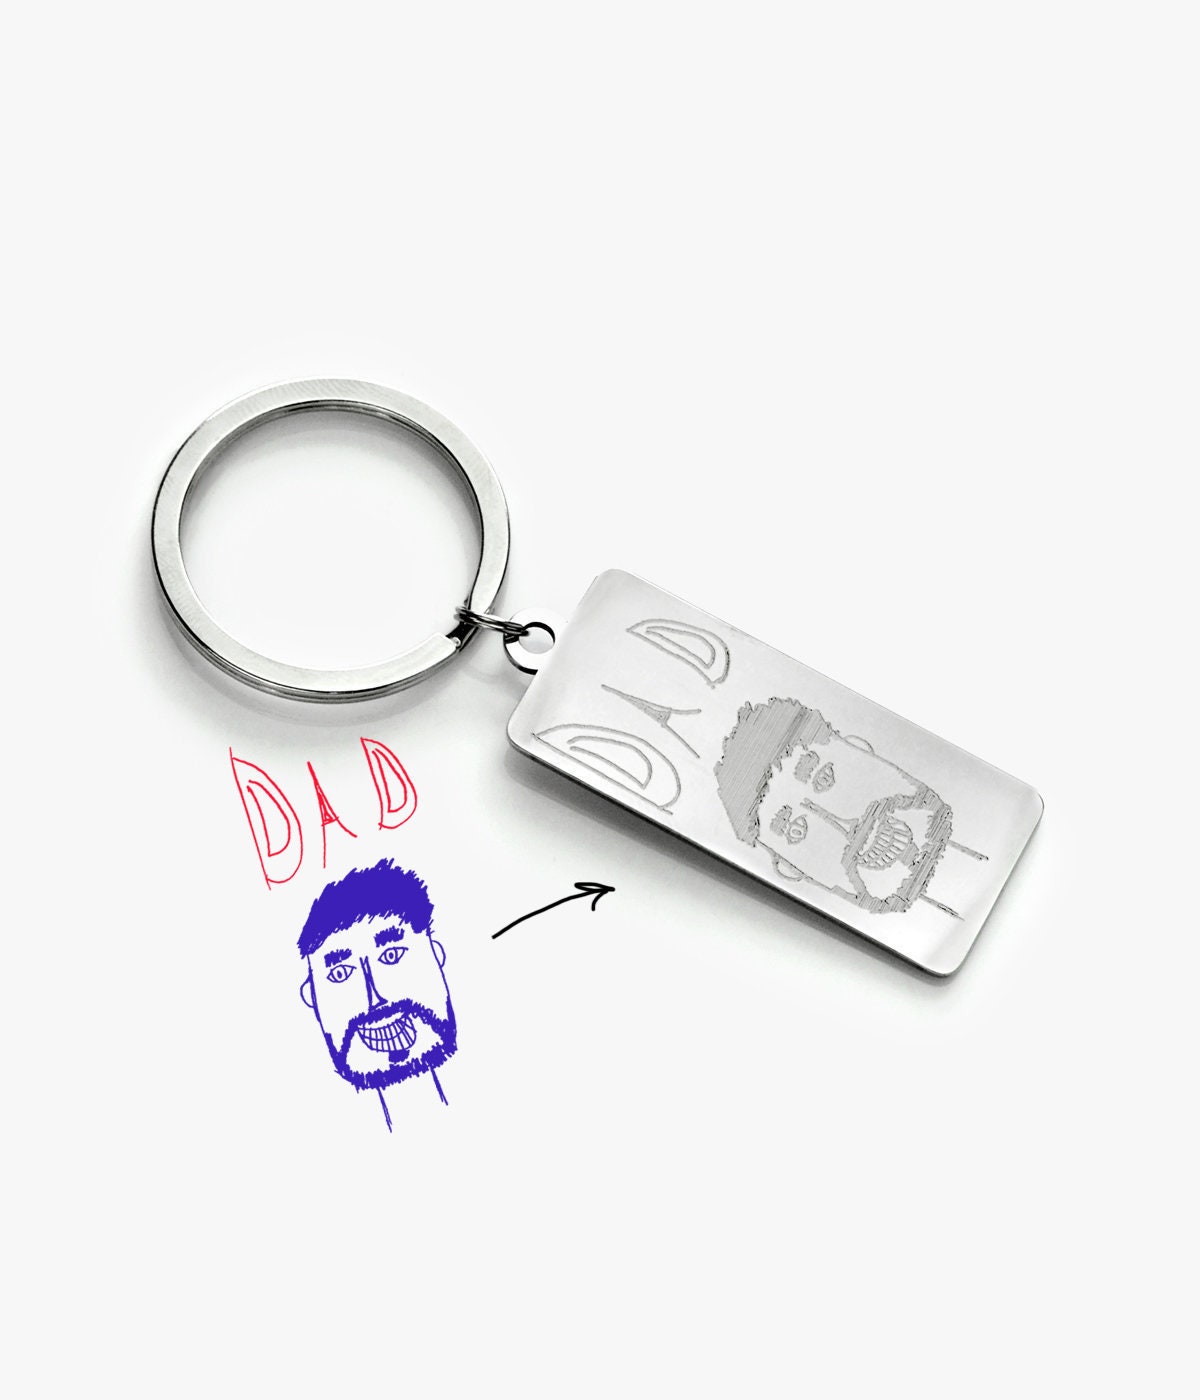 Father's Day Gift For Dad Actual Children's Drawing Or Handwriting On A Keychain Grandpa, Meaningful Key Chain Present From Kids